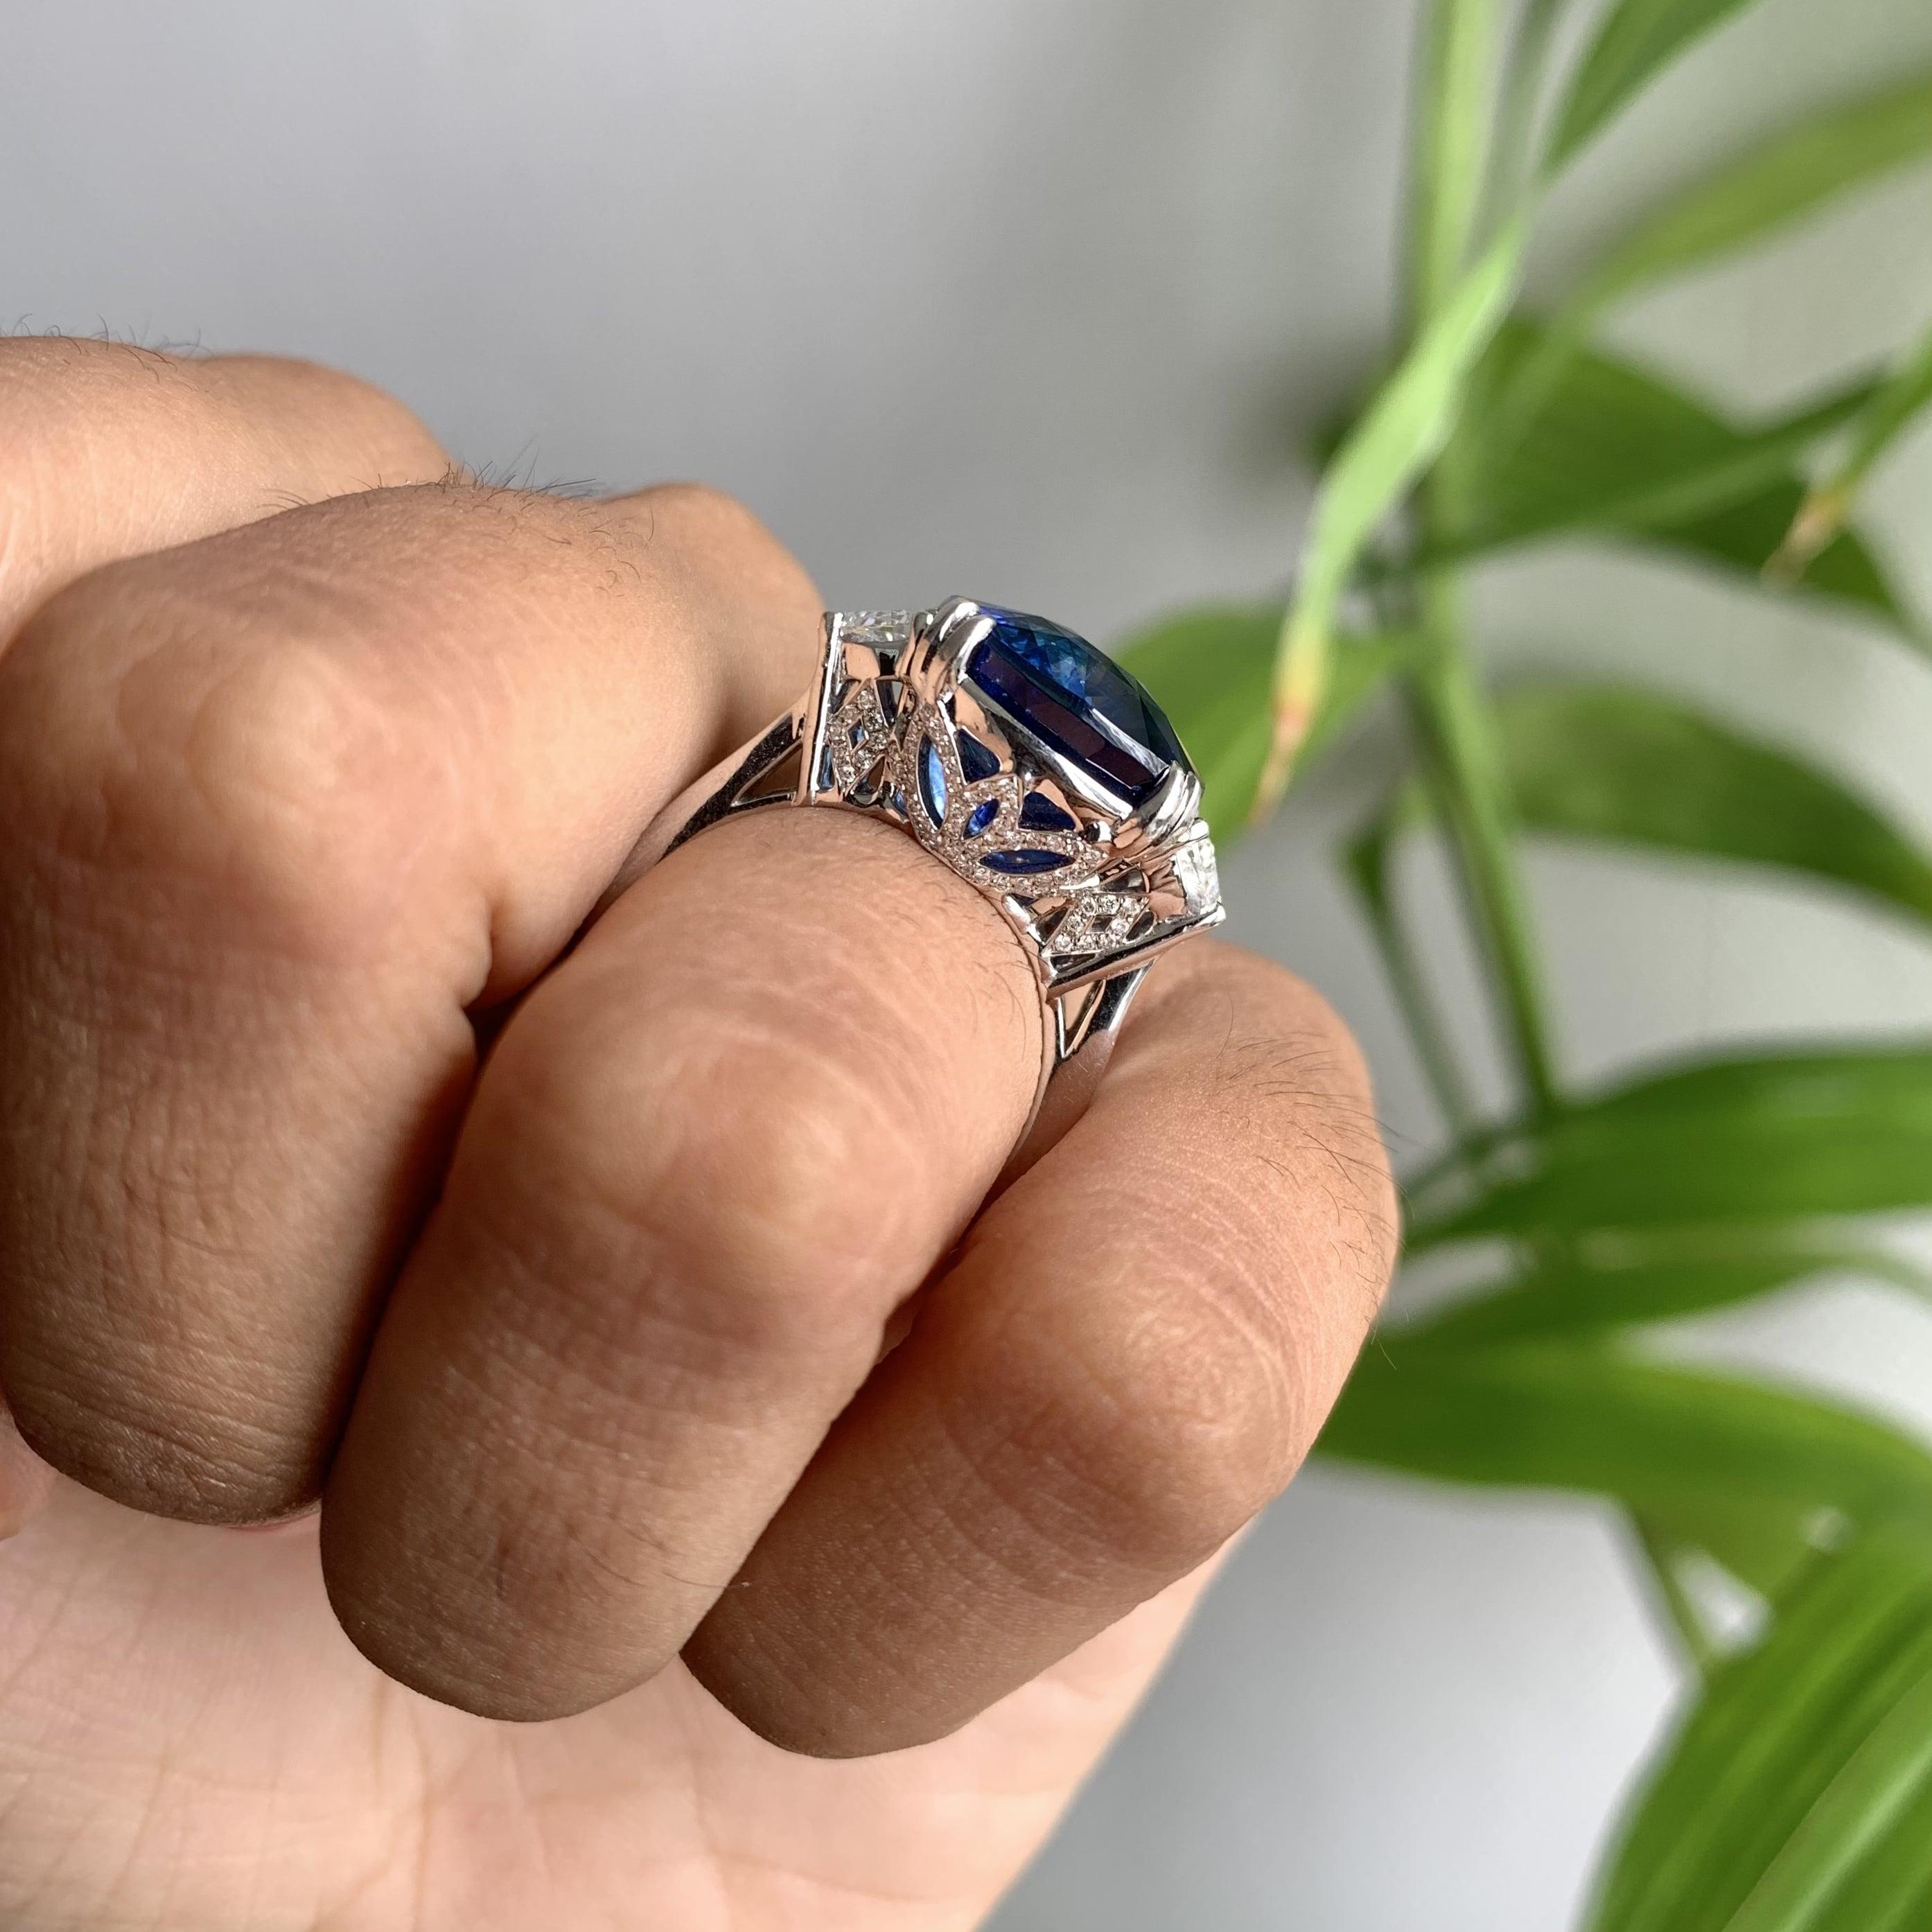 Crafted with utmost precision and finesse, this exquisite masterpiece exudes opulence in every detail. The center of attention is a captivating, high-quality Royal Blue Sapphire, boasting a mesmerizing hue reminiscent of a deep, starry night